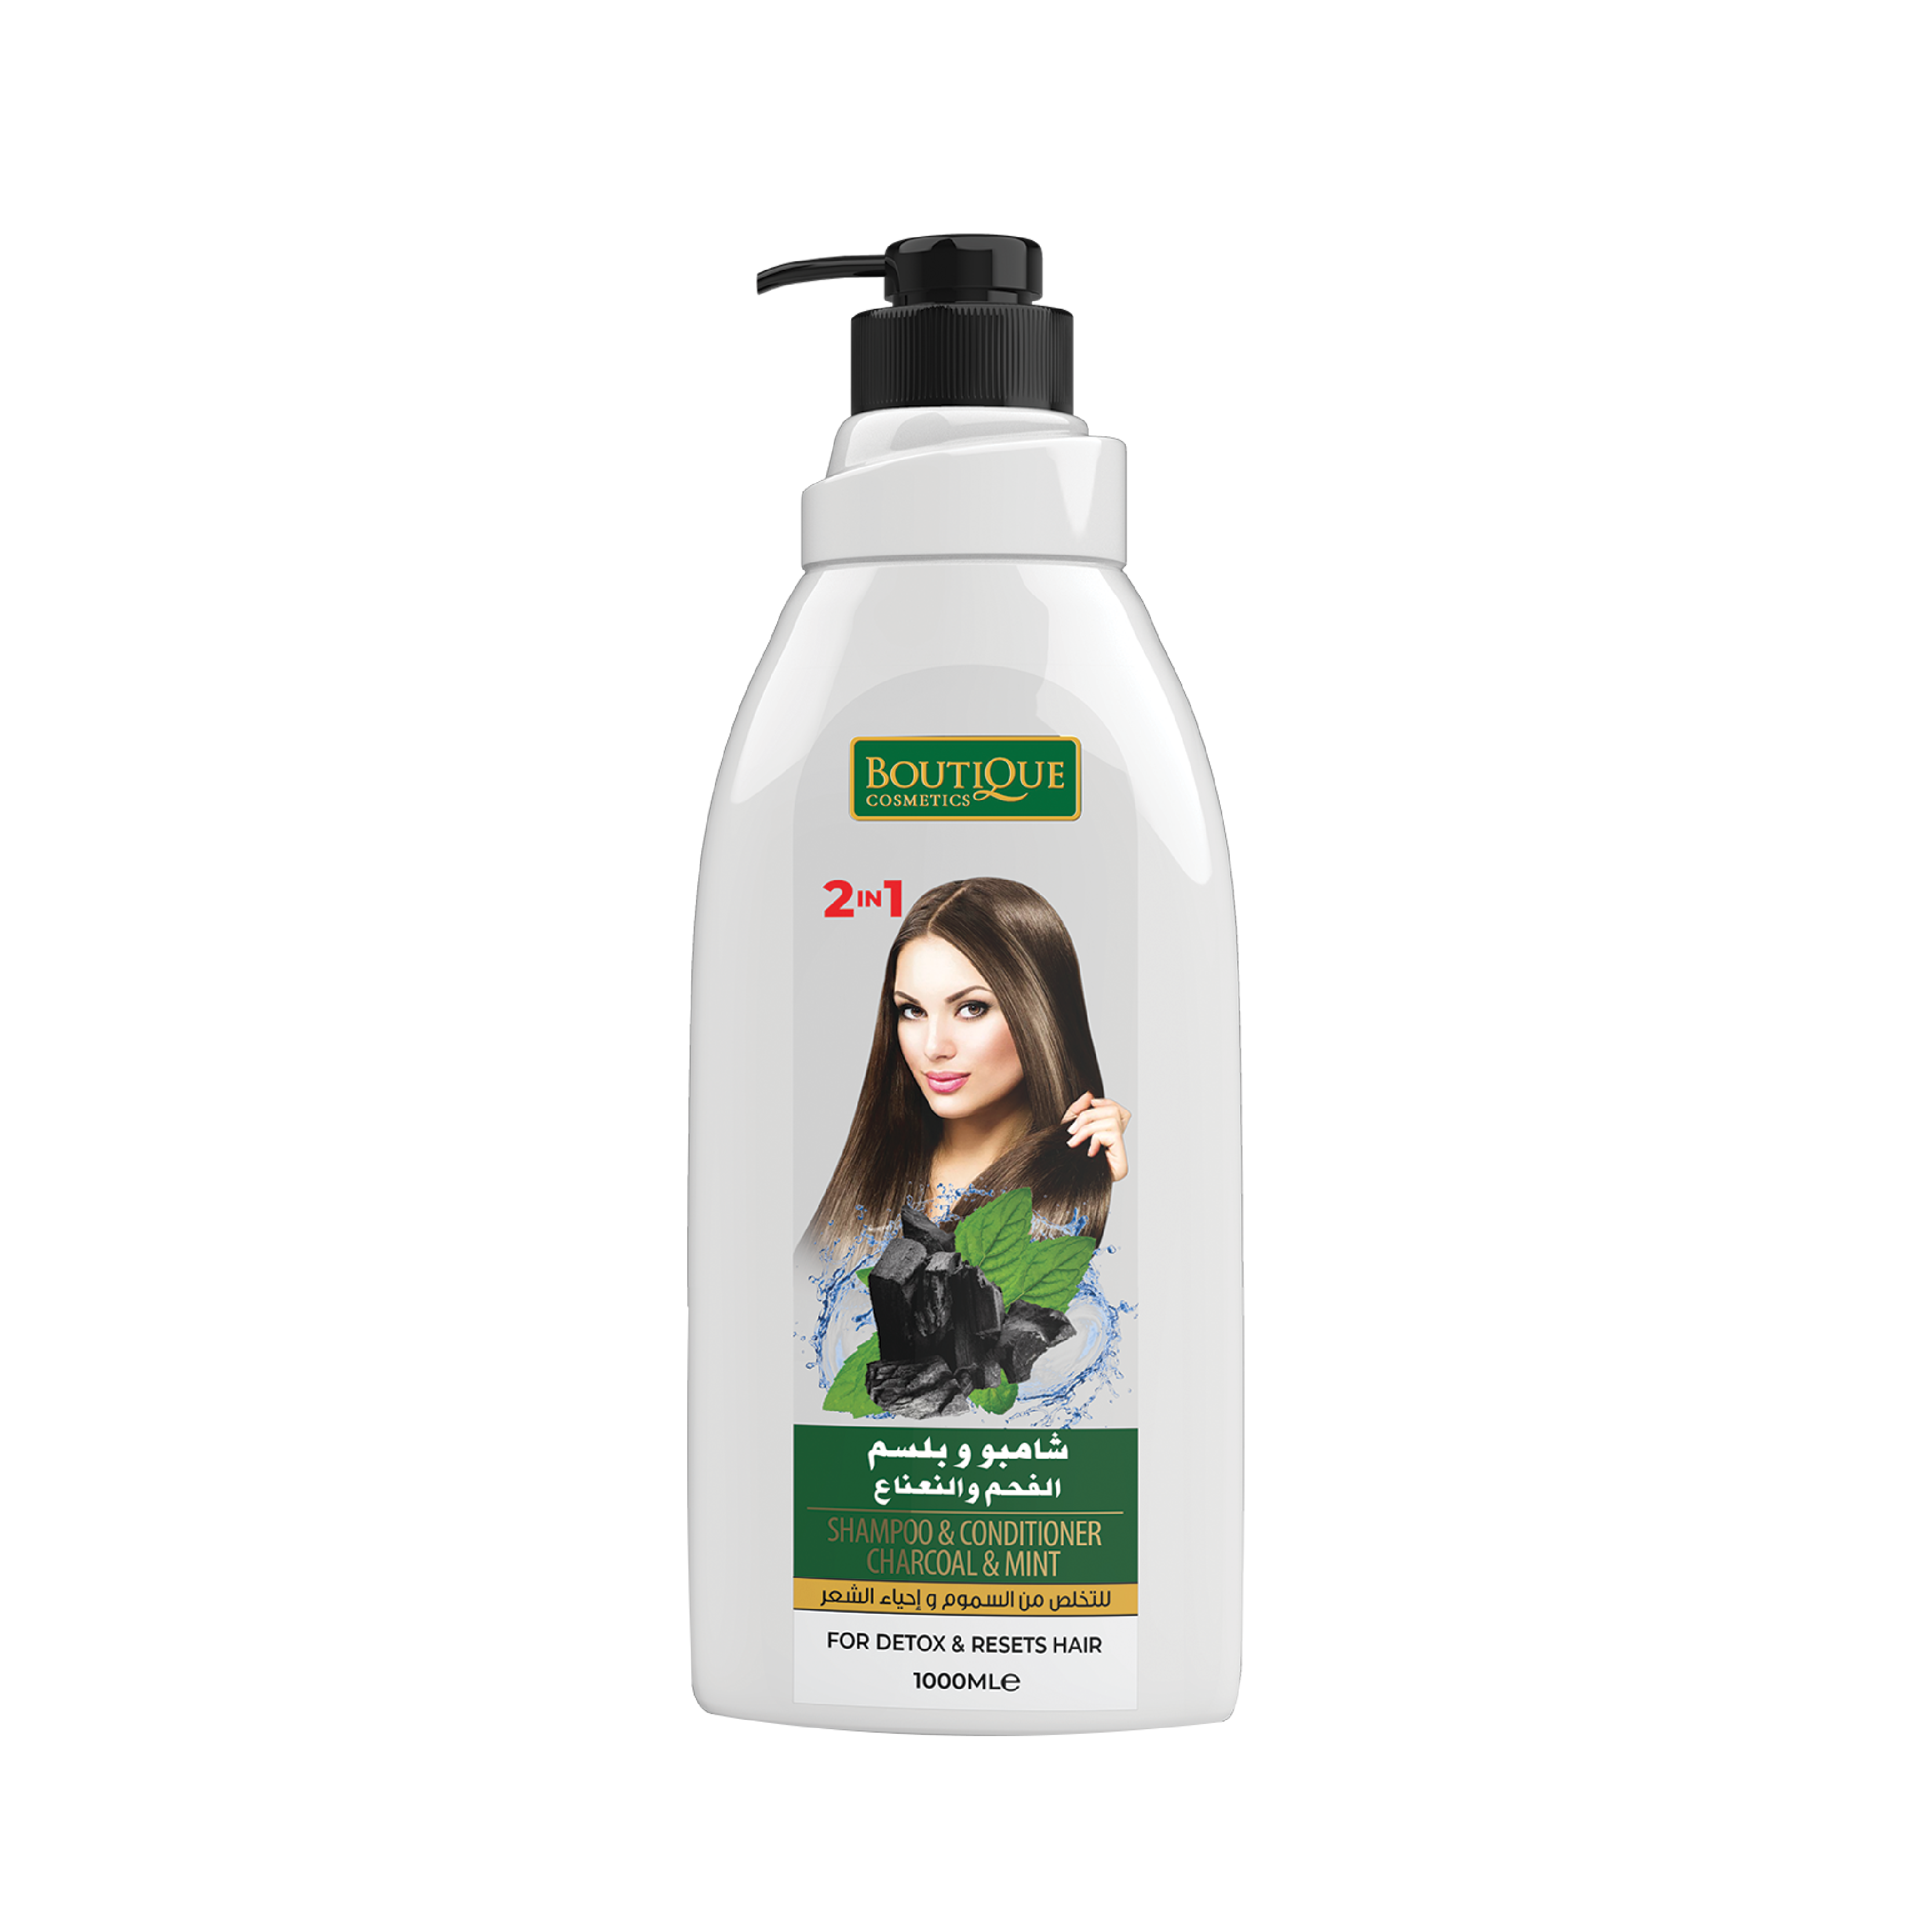 Purifying Charcoal & Mint Haircare Duo - 1000ml